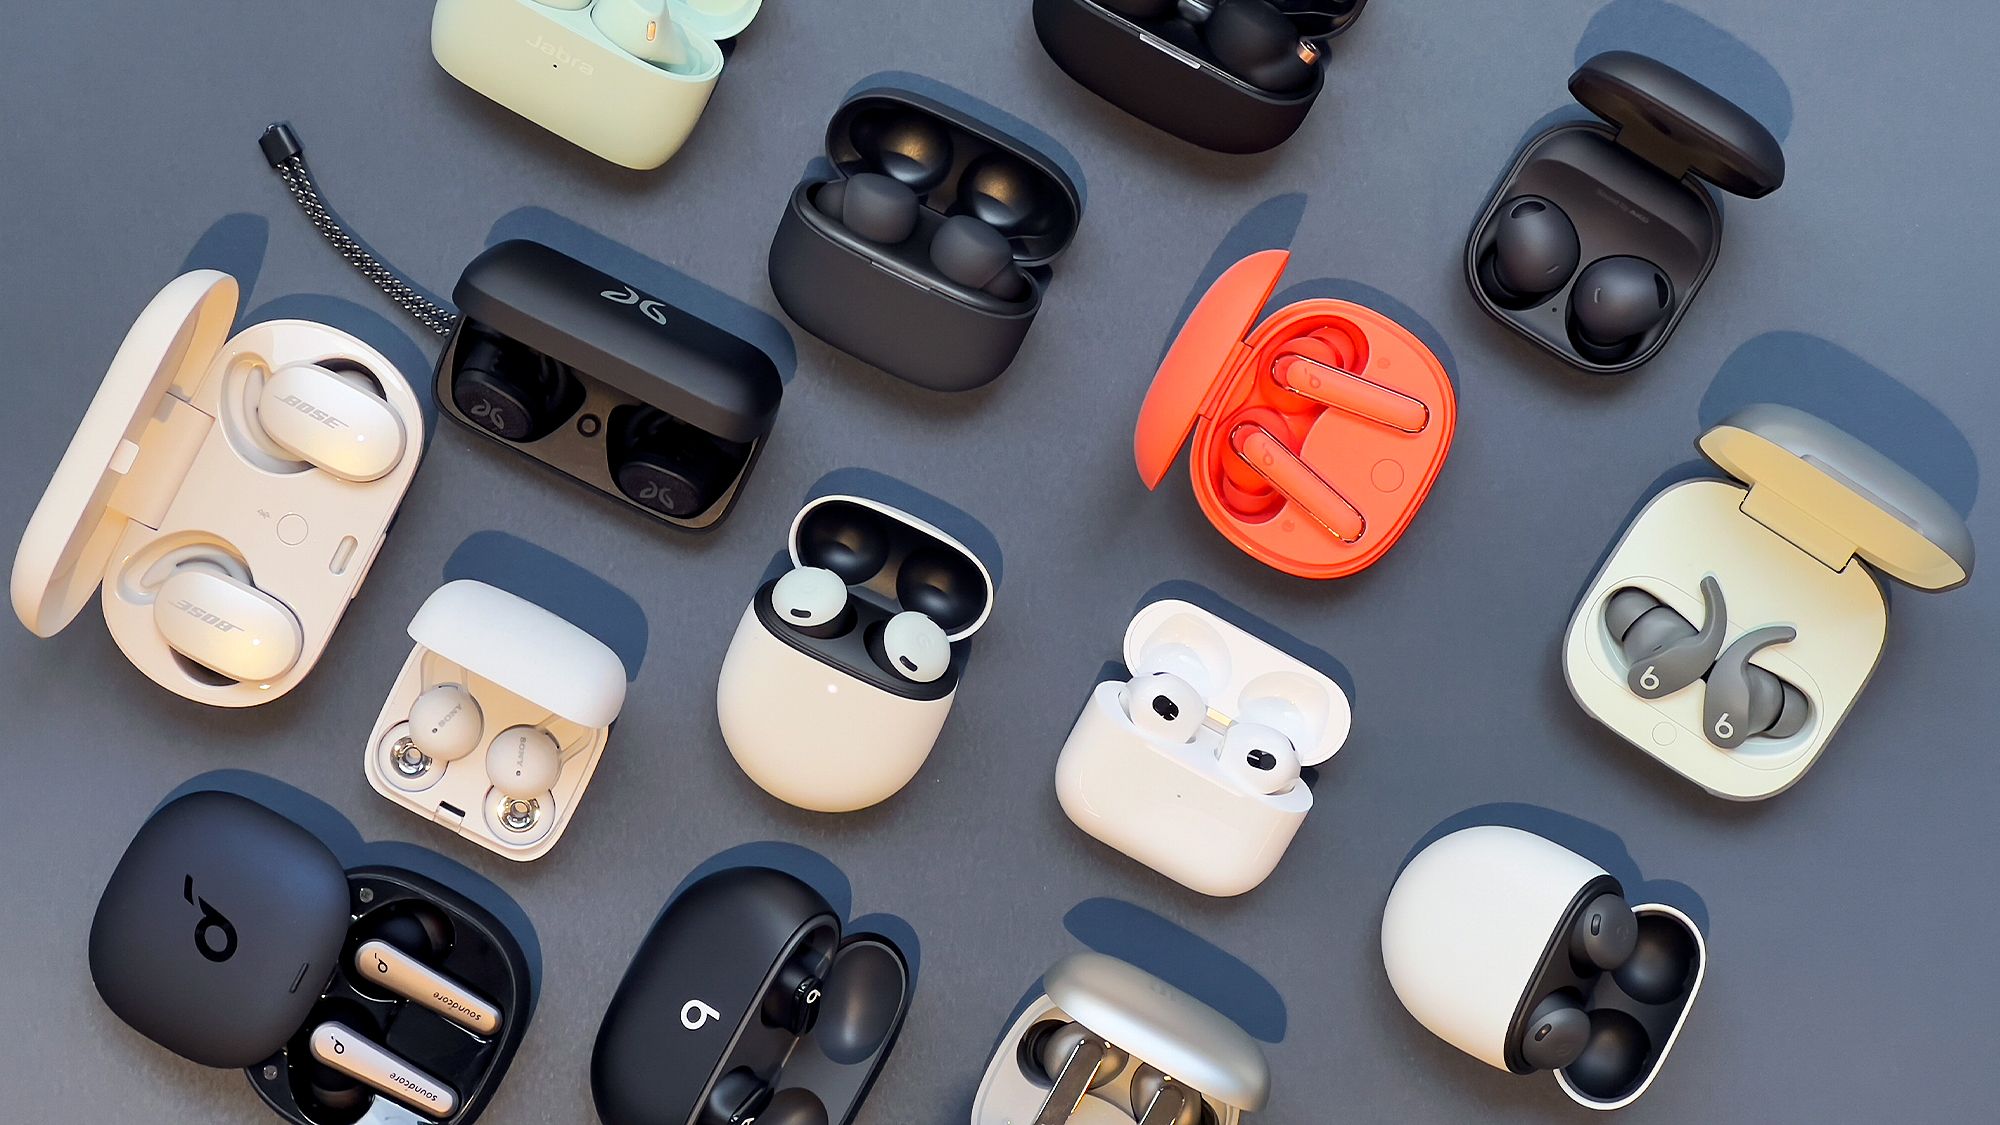 Experience True Freedom with Kagami Wireless Earbuds